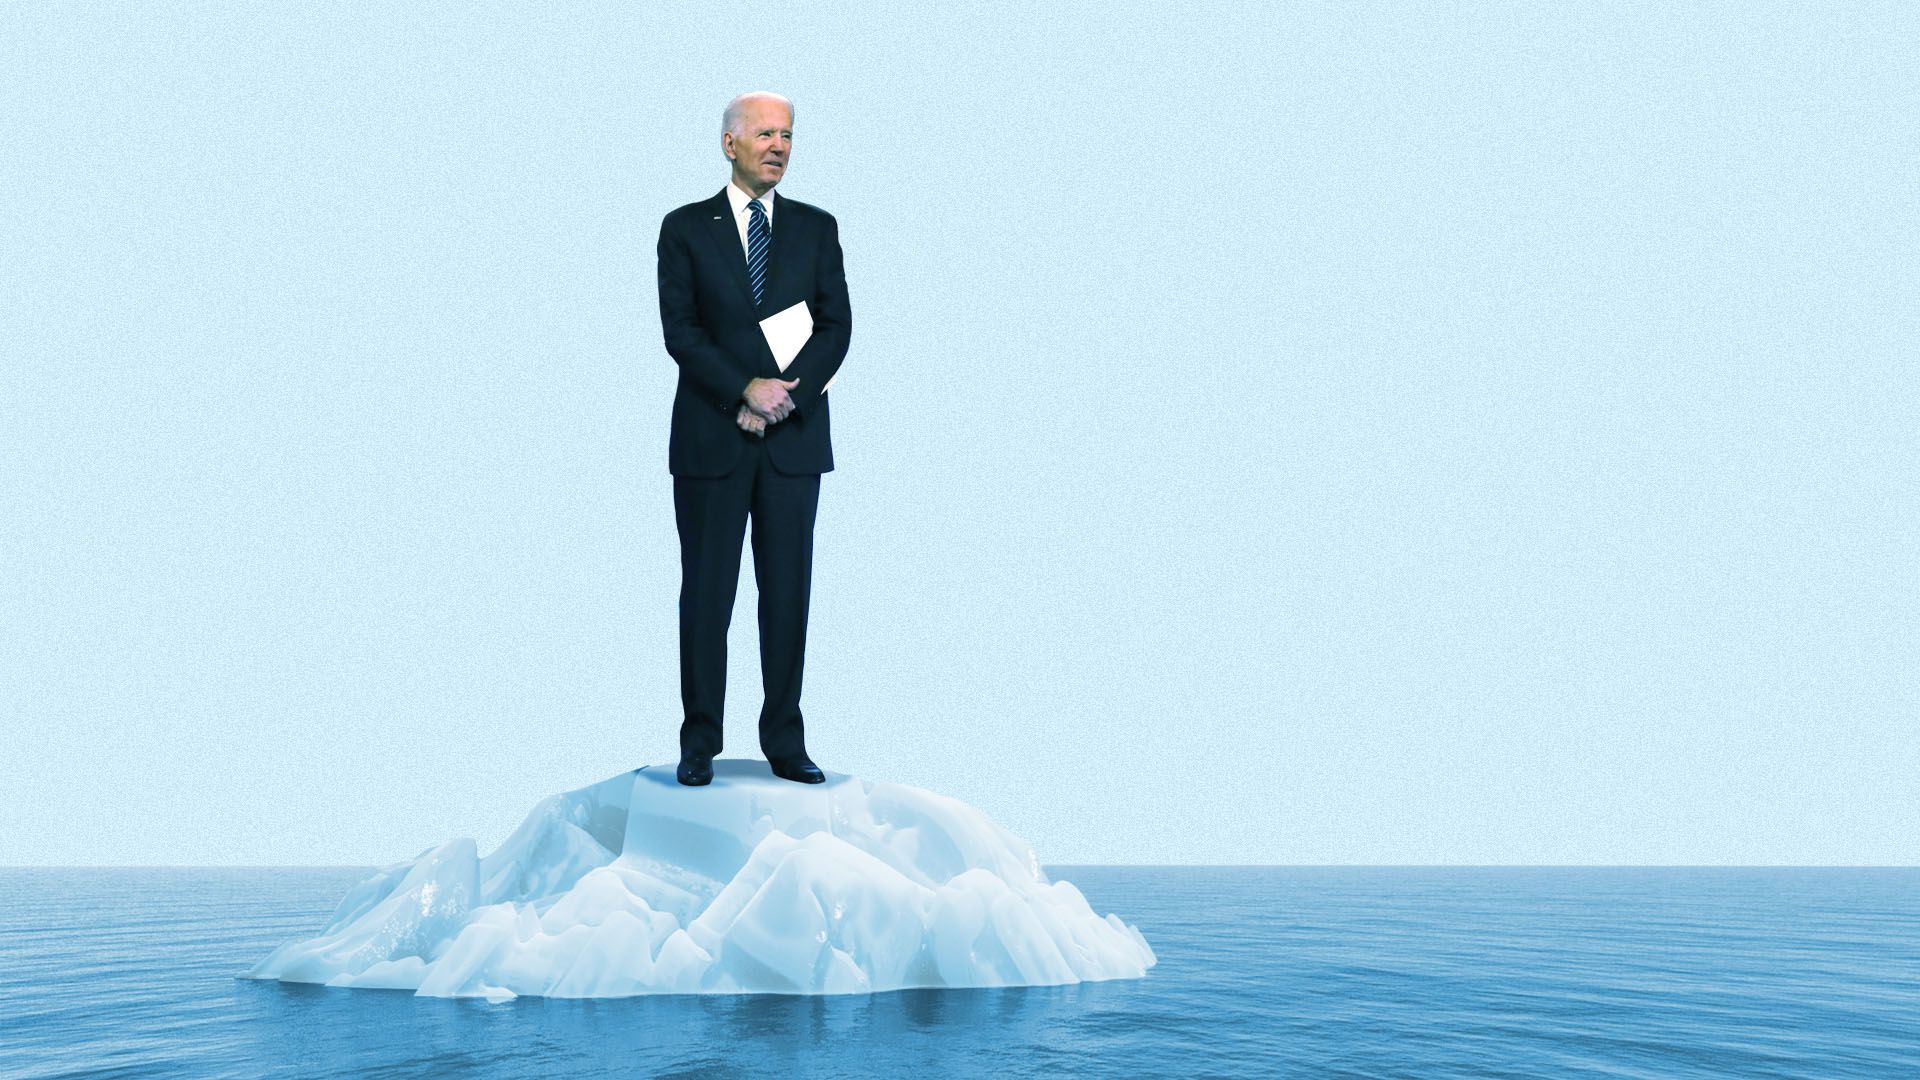 Photo illustration of Joseph Biden standing on a small patch of ice in the middle of the ocean